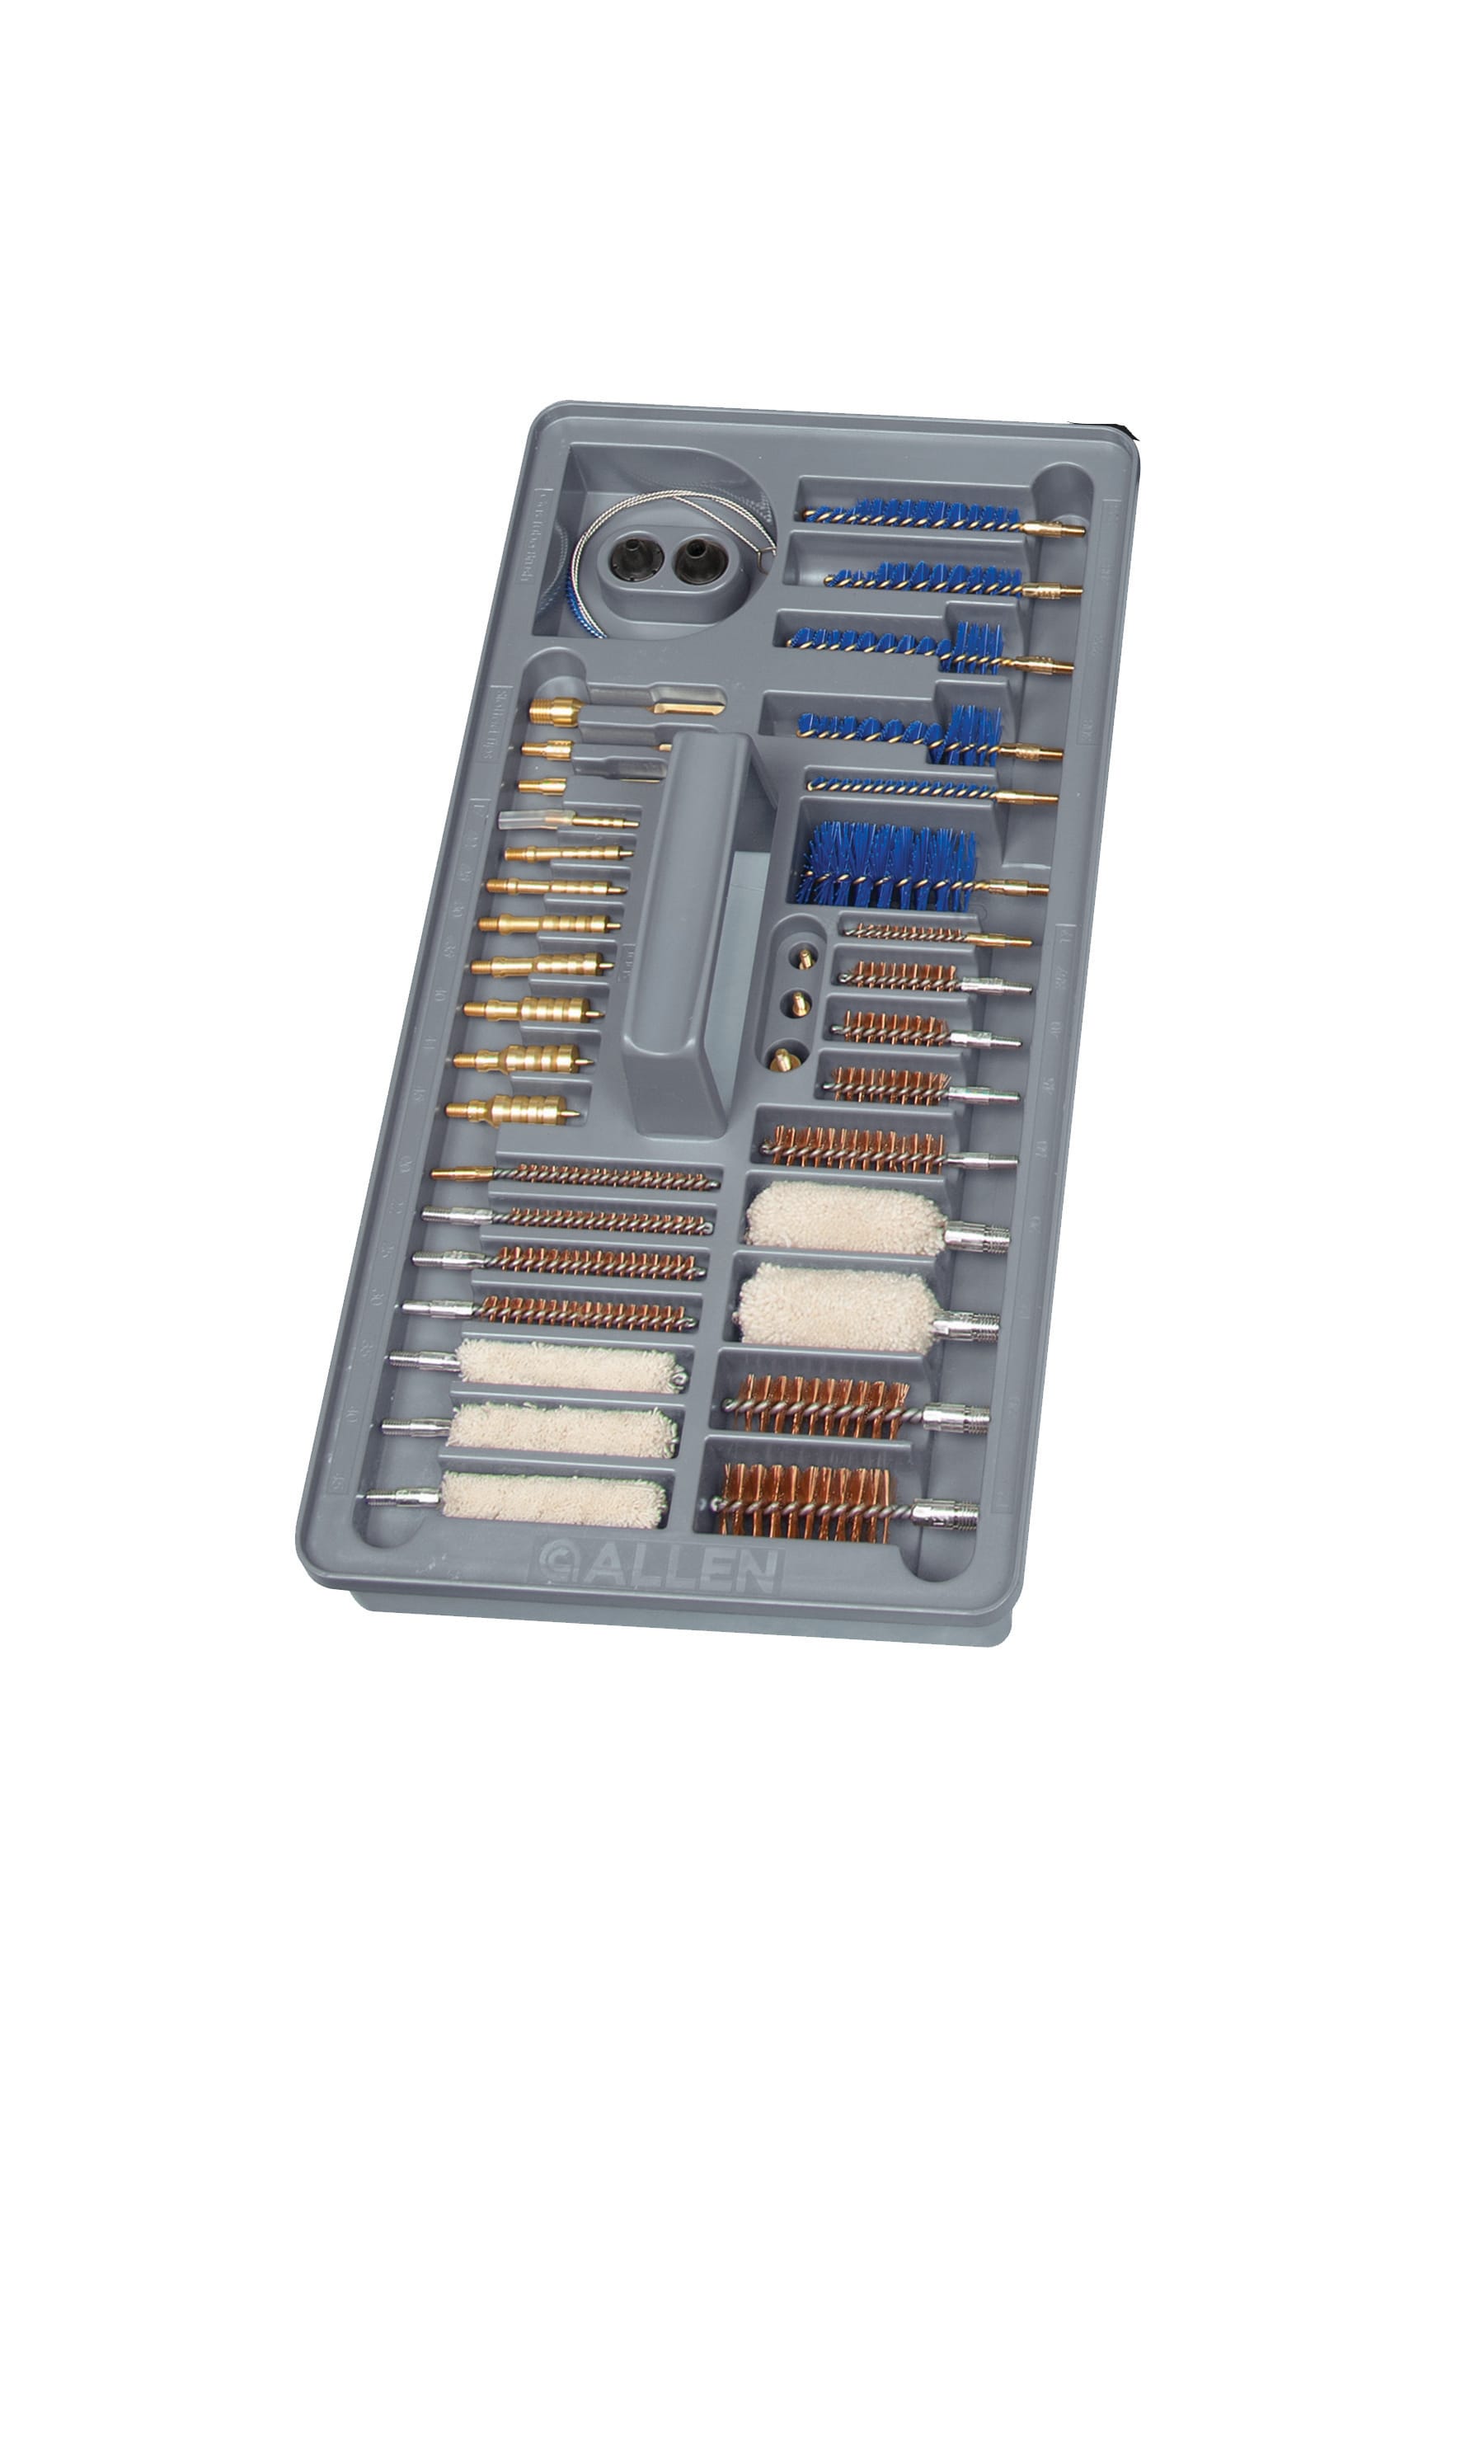 Allen Company Universal Gun Cleaning Kit & Tool Box, 65-Pieces